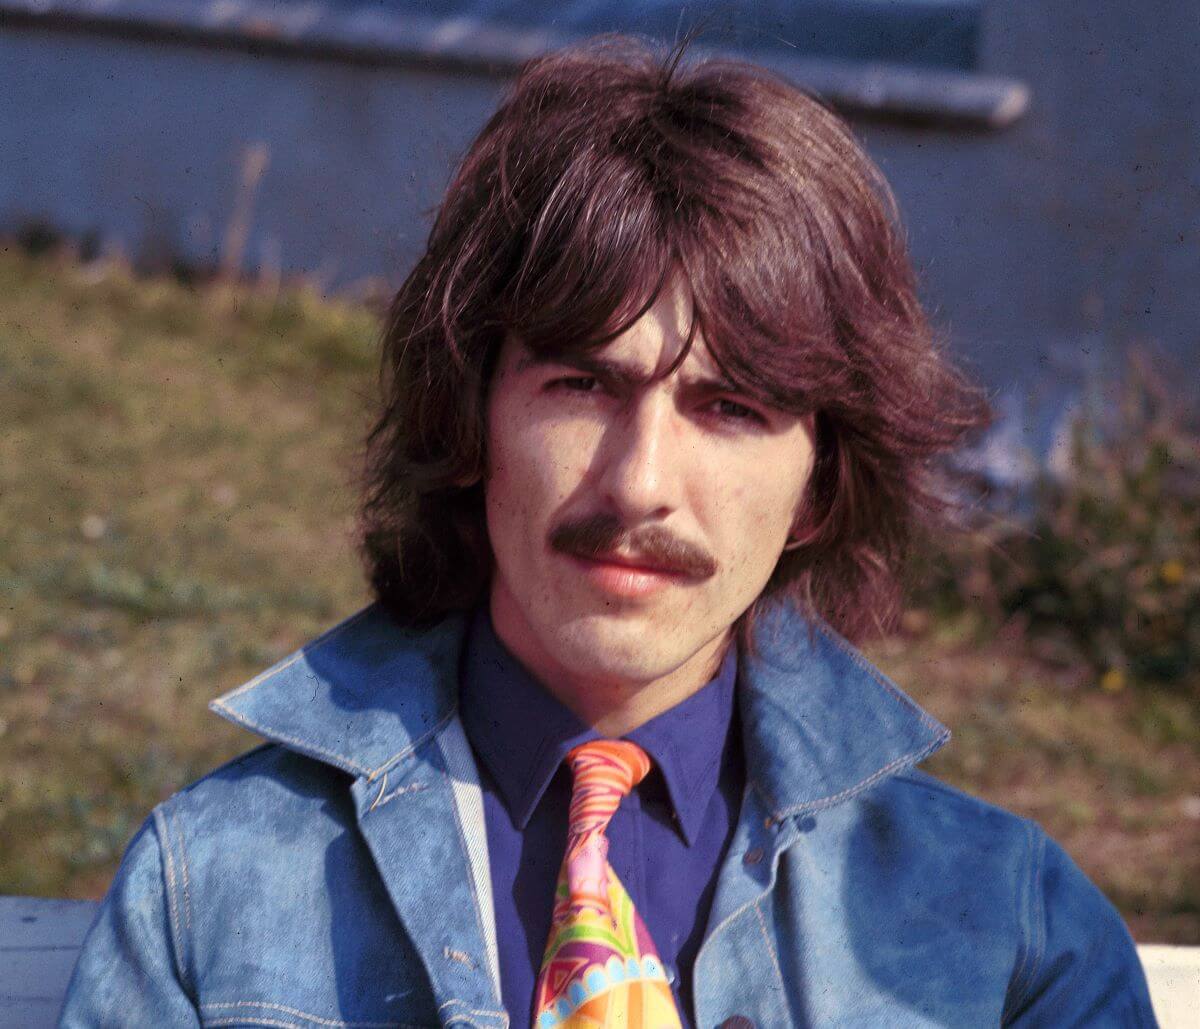 The Beatles' George Harrison wears a denim jacket and a tie. He sits on the grass near water.